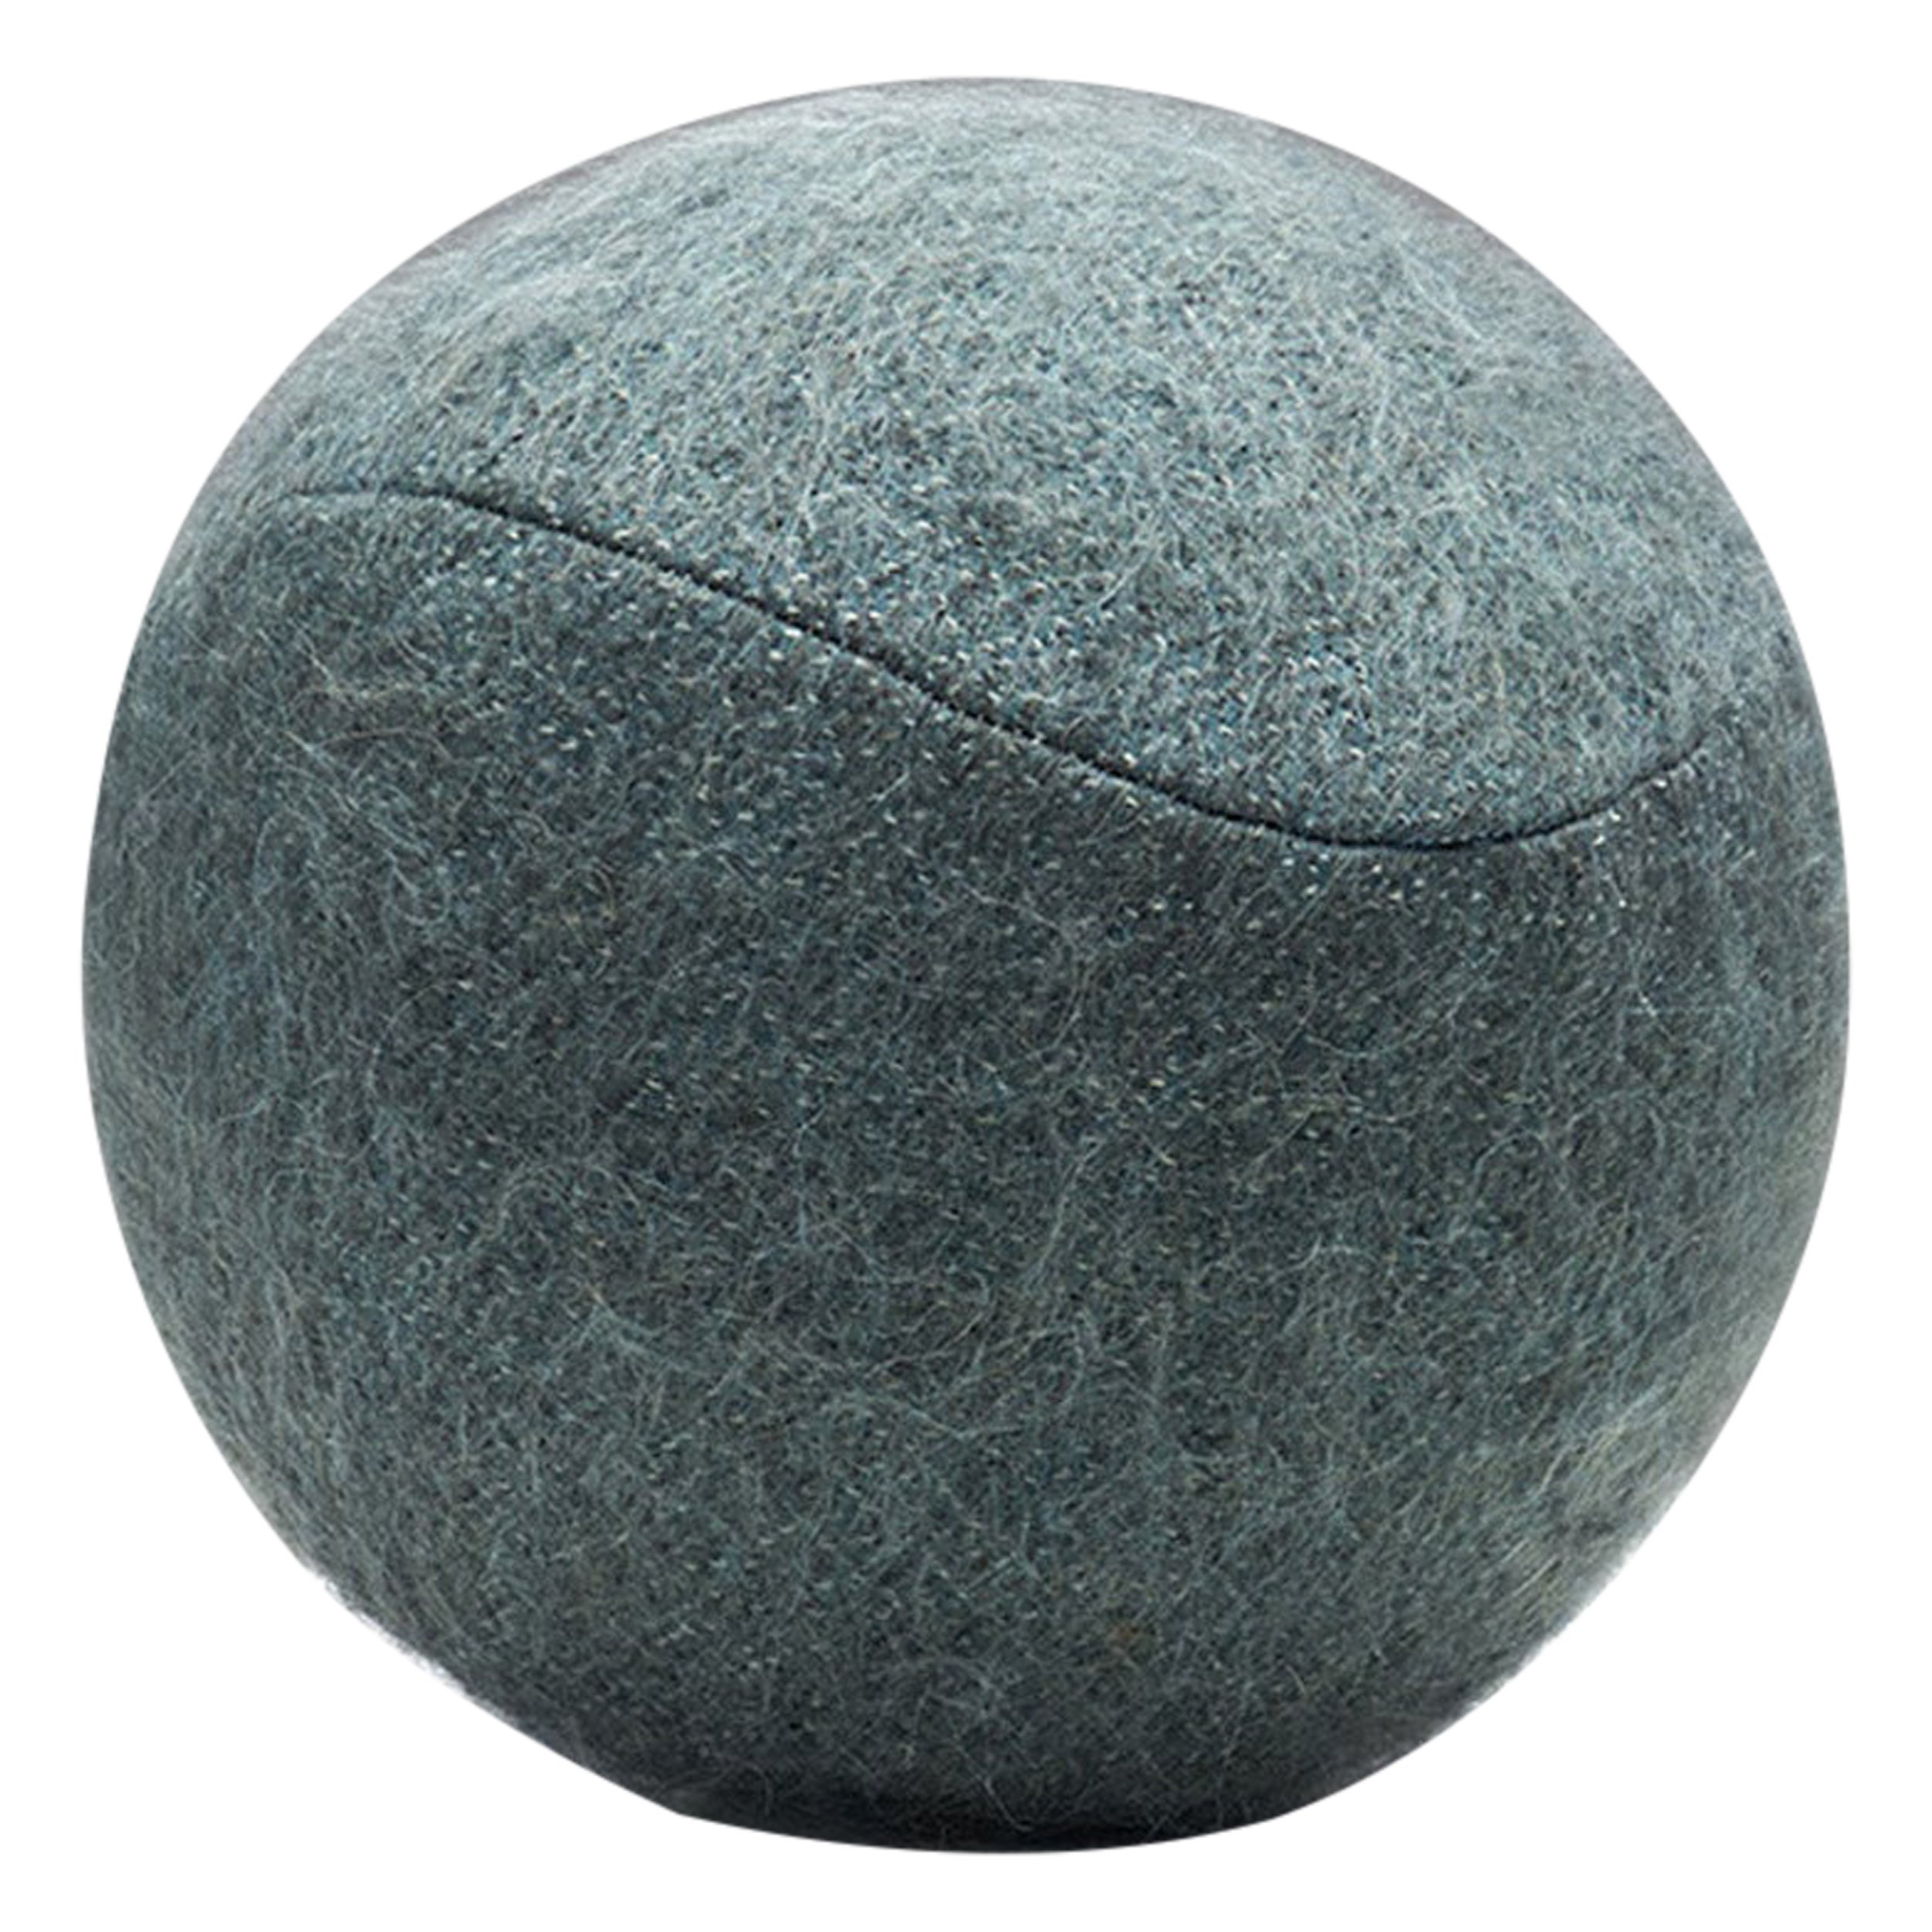 Accent Ball Pillow in Bluish-Grey Fabric For Sale